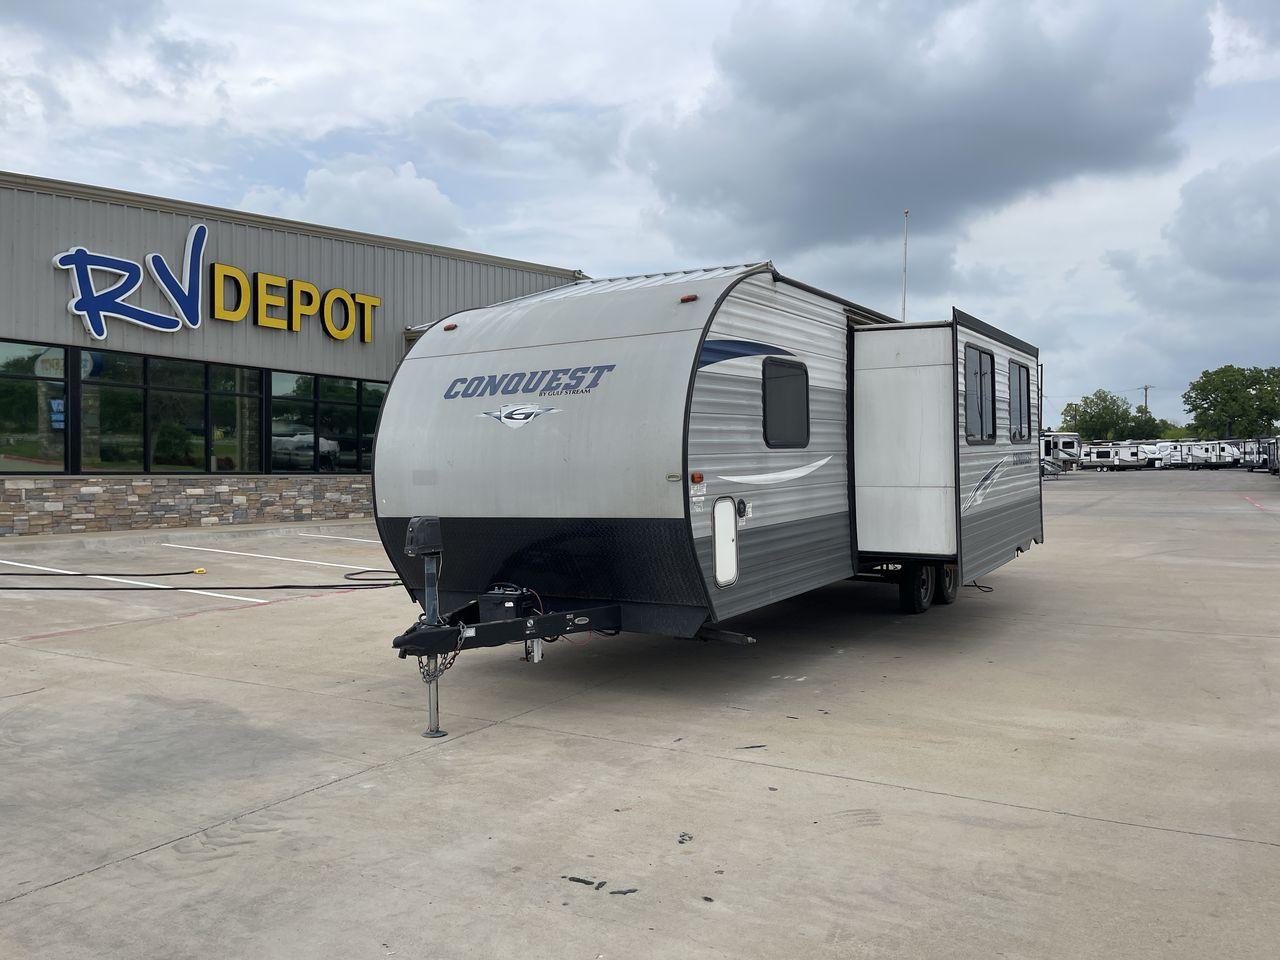 2019 GULF STREAM CONQUEST 274QB (1NL1G3226K1) , Length: 32.25 ft. | Dry Weight: 6,230 lbs. | Slides: 1 transmission, located at 4319 N Main Street, Cleburne, TX, 76033, (817) 221-0660, 32.435829, -97.384178 - The 2019 Gulf Stream 274QB is a dual-axle steel-wheel set-up that measures 32.25 ft. in length. It has a dry weight of 6,230 lbs. and a payload capacity of 1,918 lbs. It has automatic heating and cooling rated at 16,000 and 13,500 BTUs, respectively. It is also equipped with one power slide and a po - Photo #0